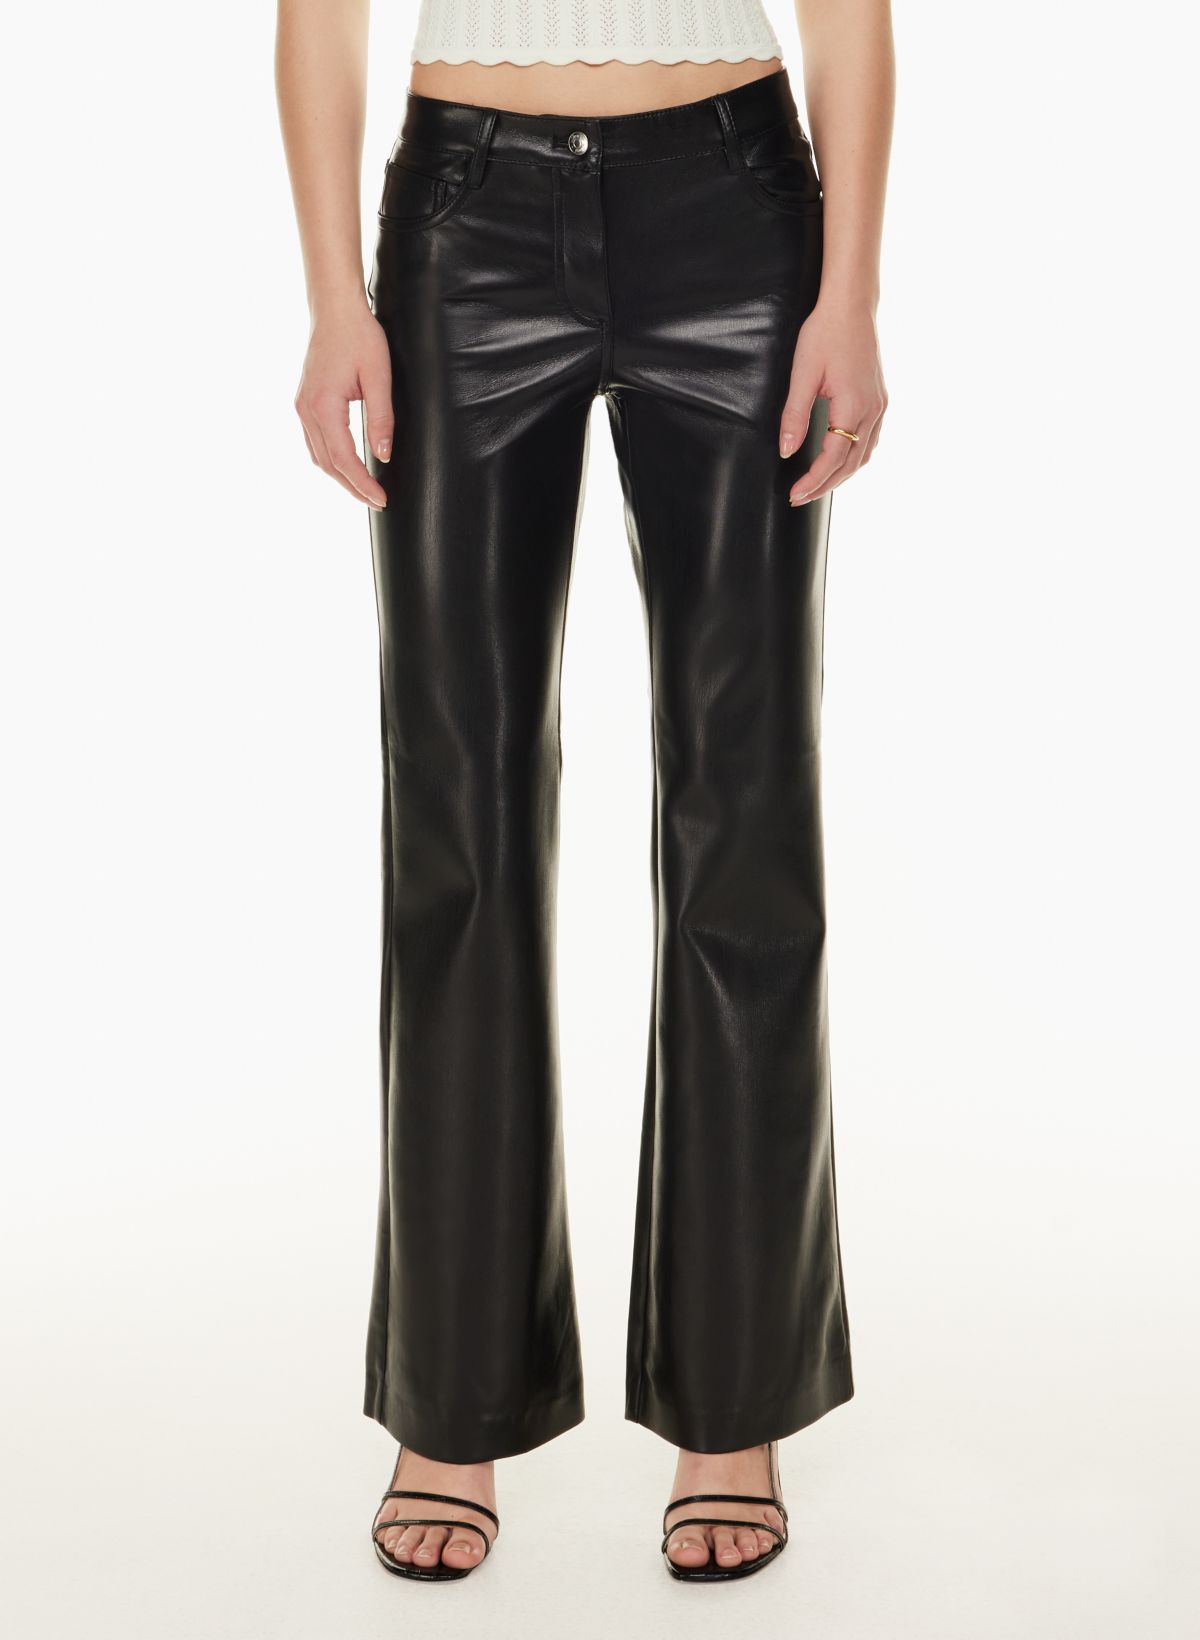 NADDA  Leather Low Rise Pants – LAMARQUE